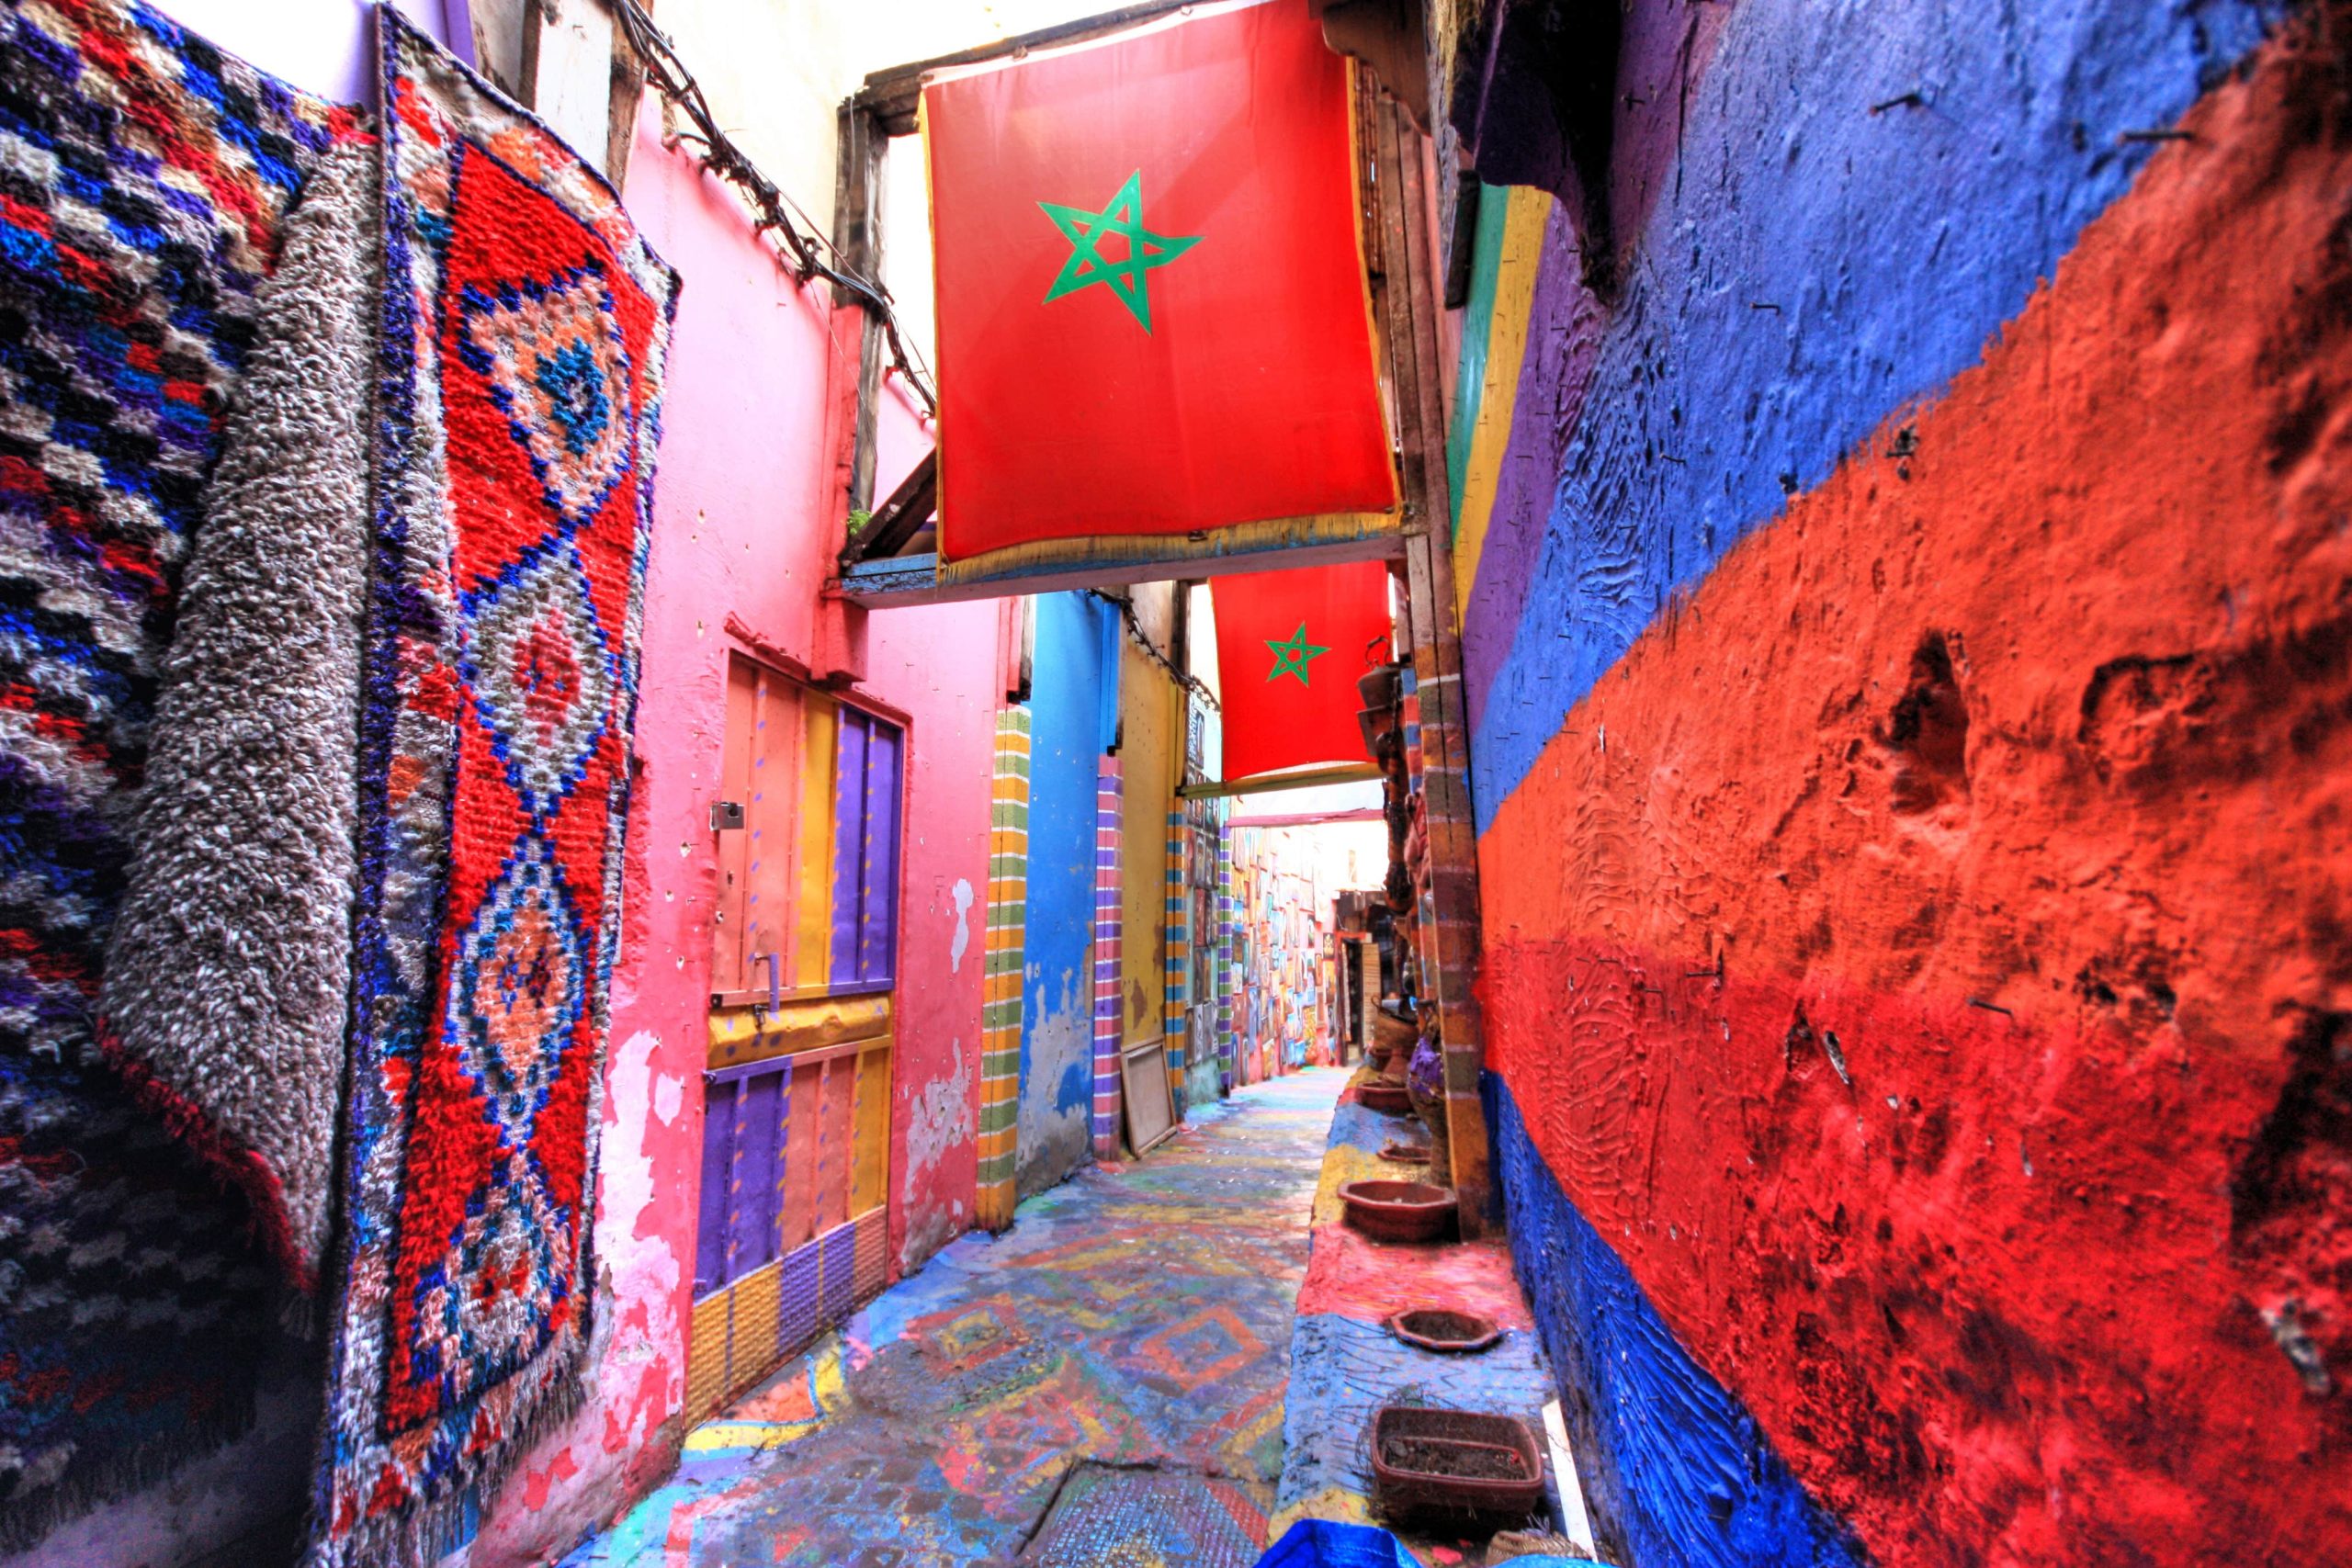 Authorities Seize More Than 2 Tons of Cannabis in Morocco